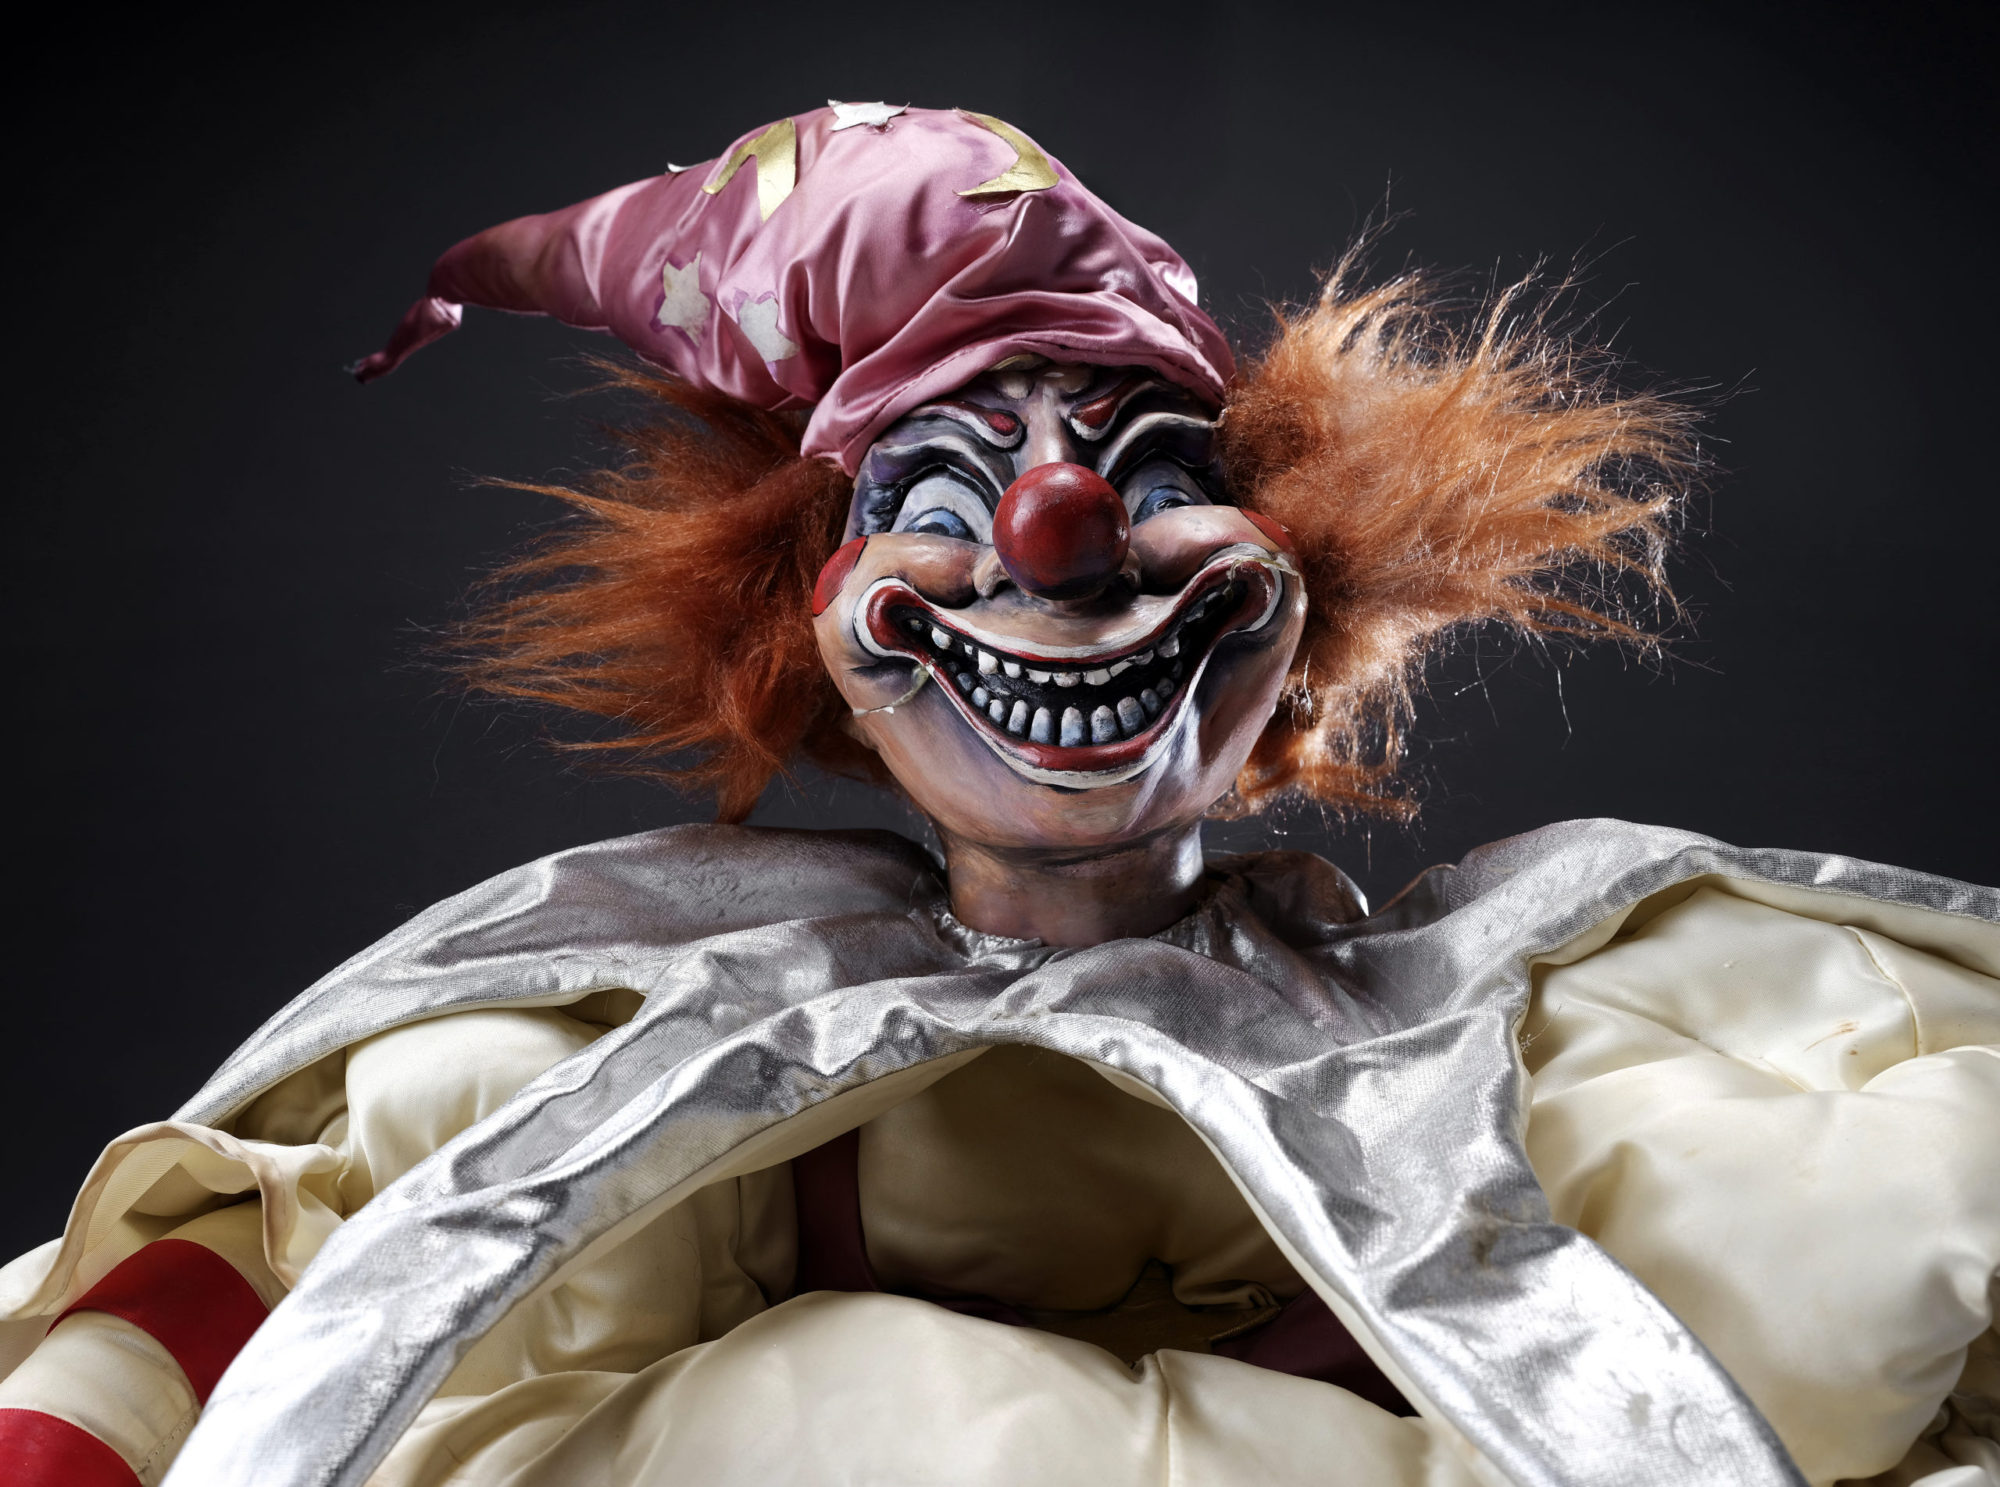 The Clown Doll from 'Poltergeist' Just Sold for Over $650,000!